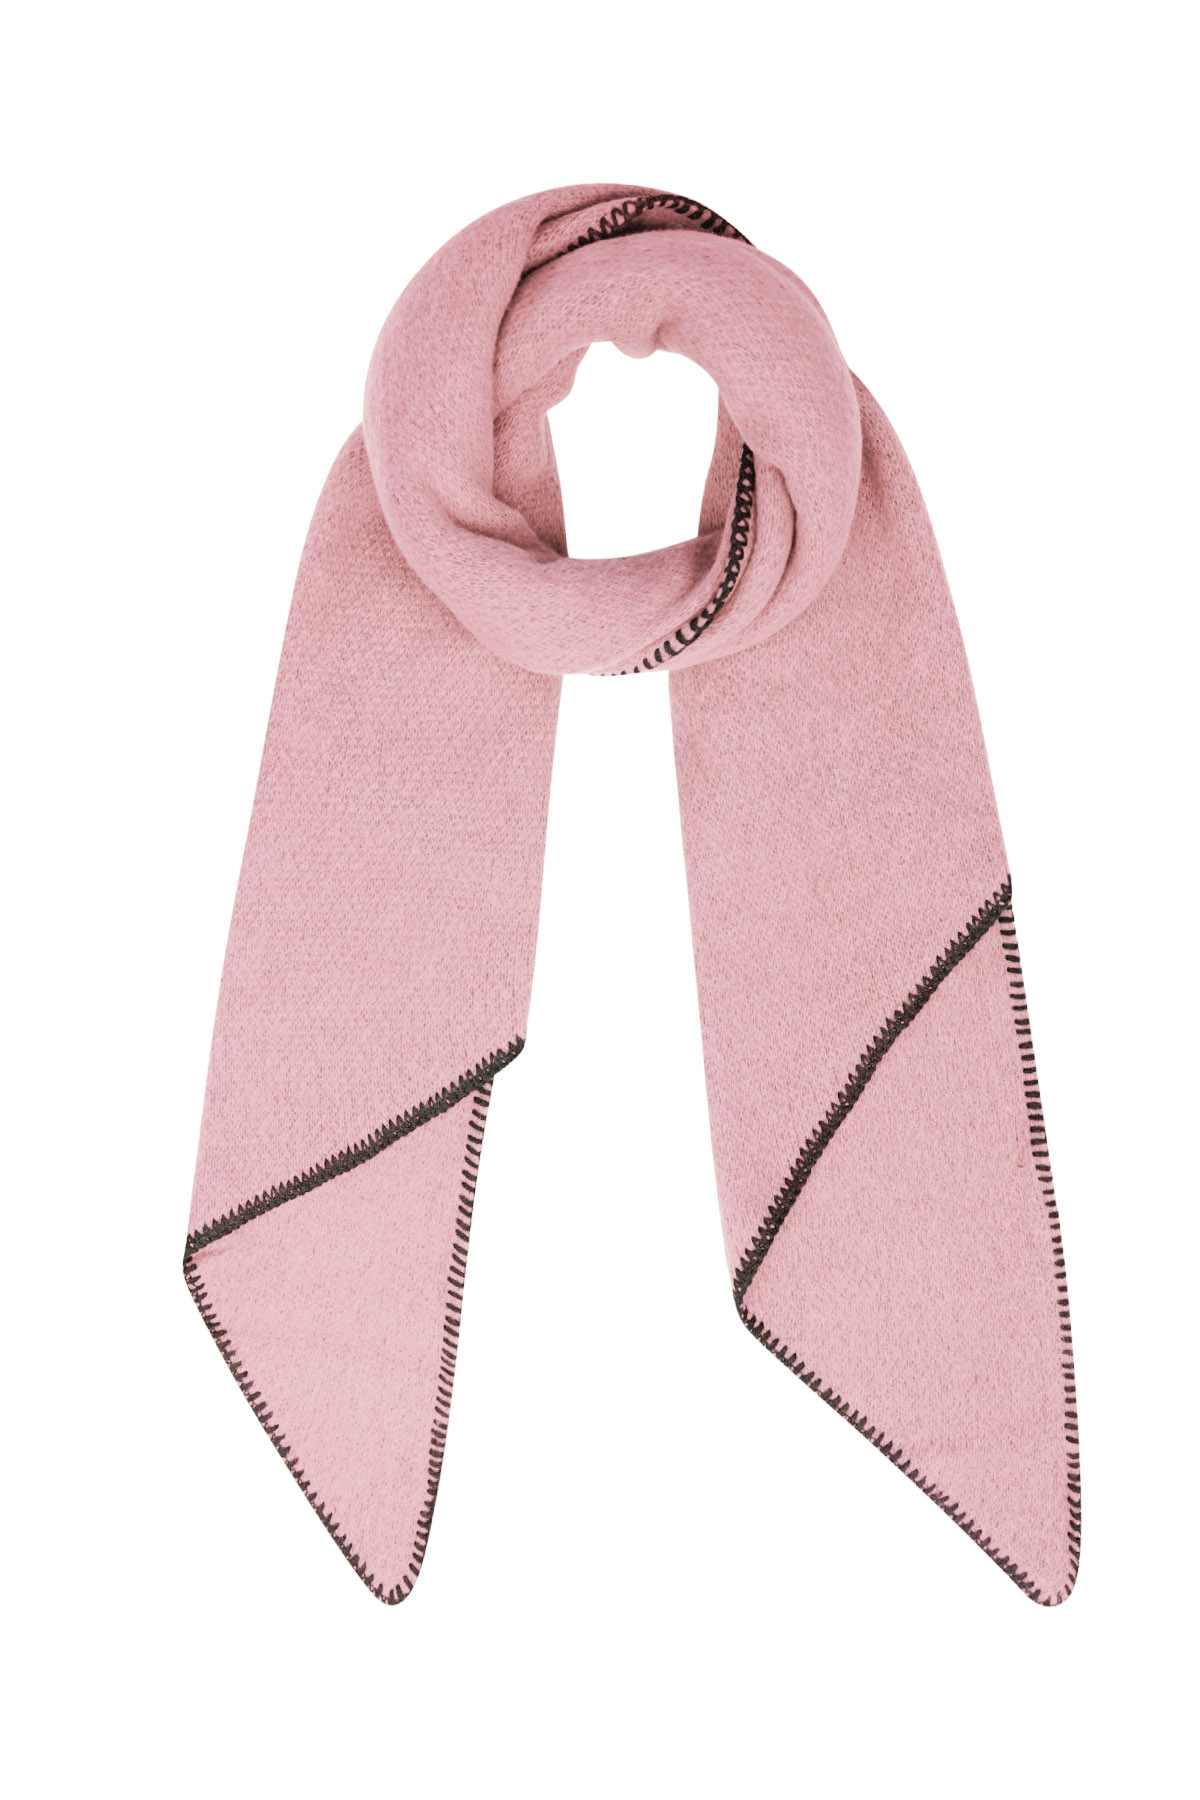 Winter scarf unicolor with black stitching - pink h5 